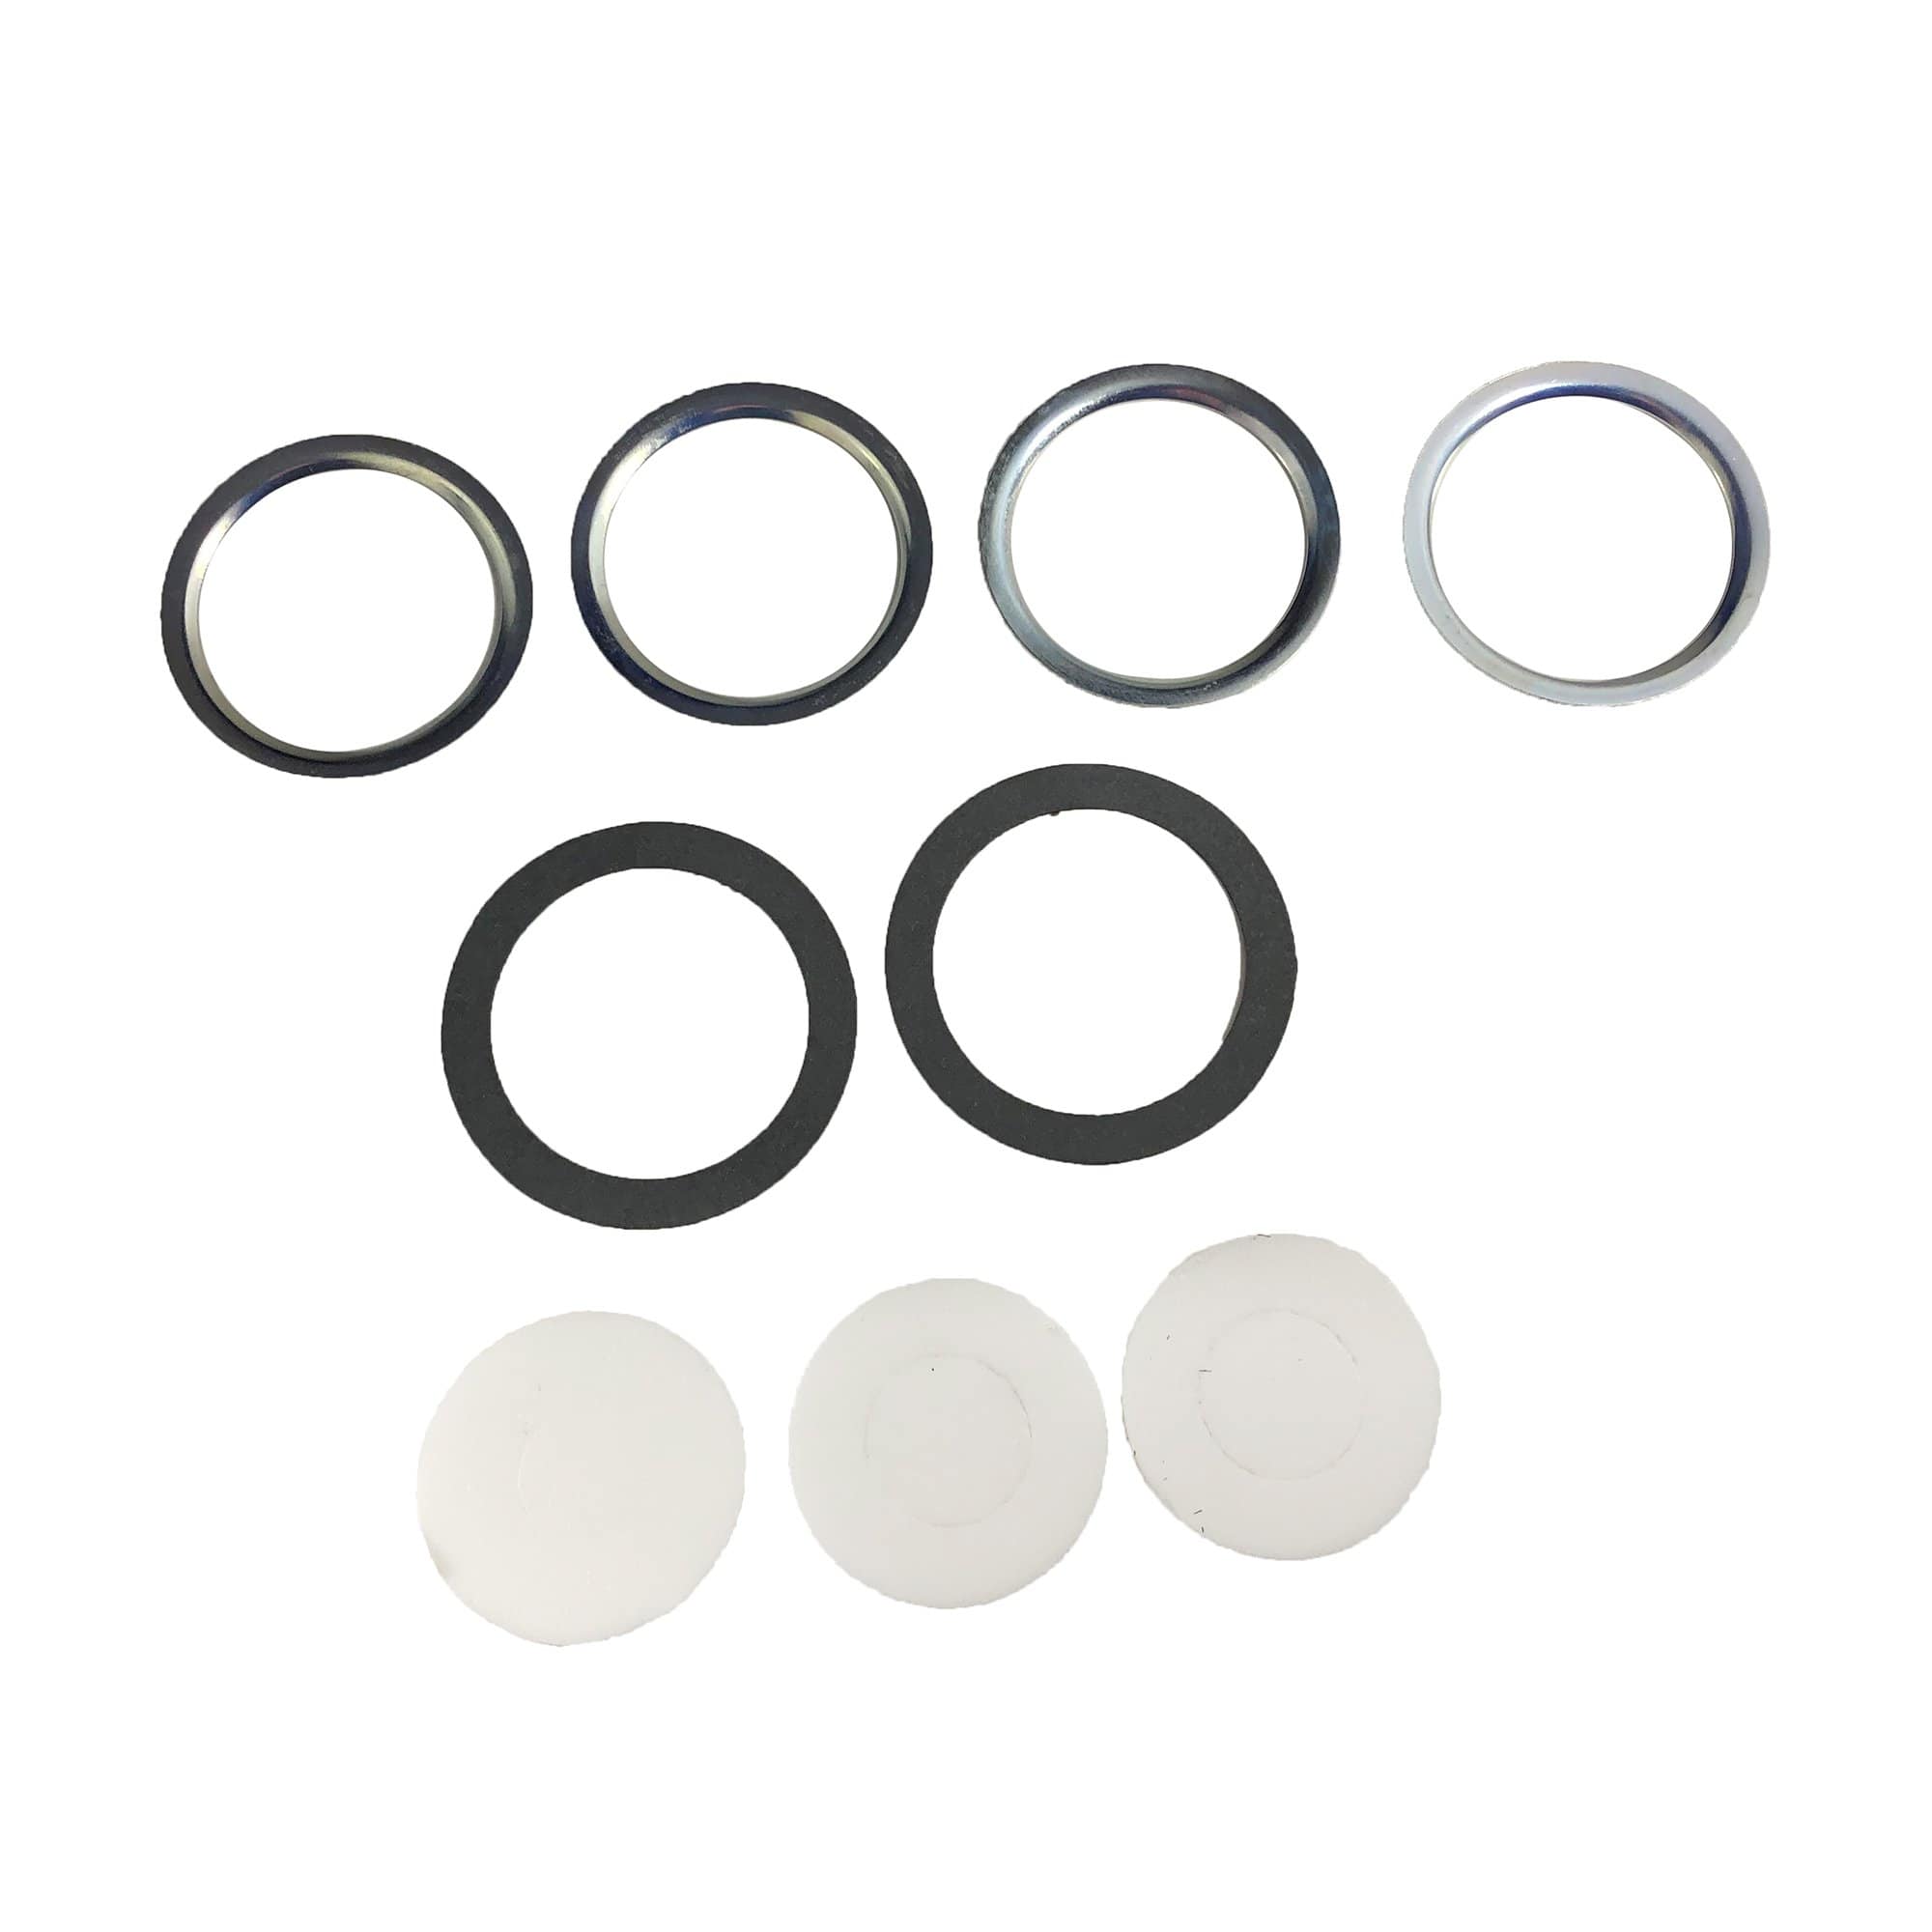 Atwood 96010 Water Heater Gasket Kit For 6 Gallon Water Heaters